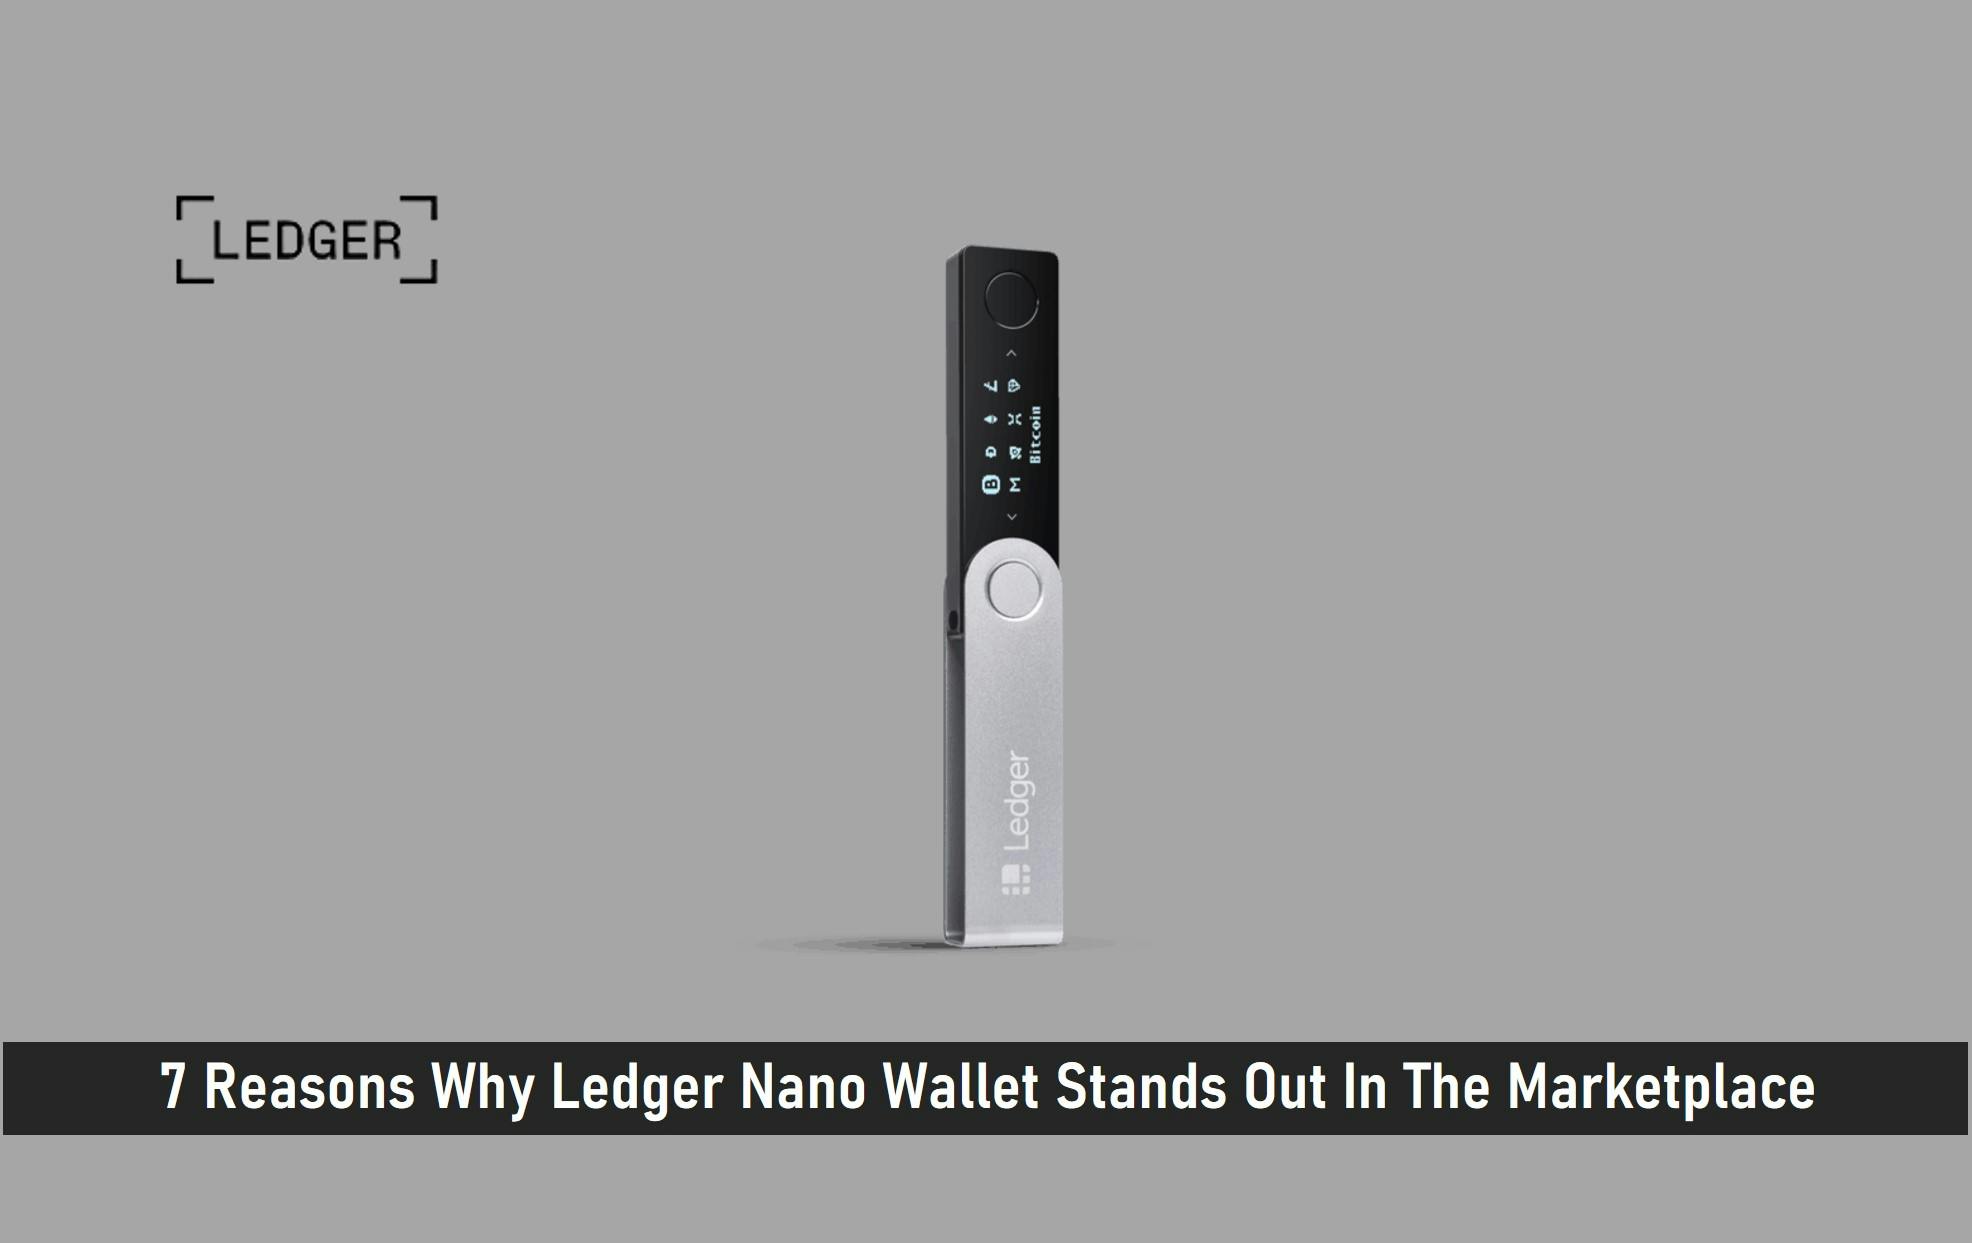 7 Reasons Why Ledger Nano Wallet Stands Out In The Marketplace